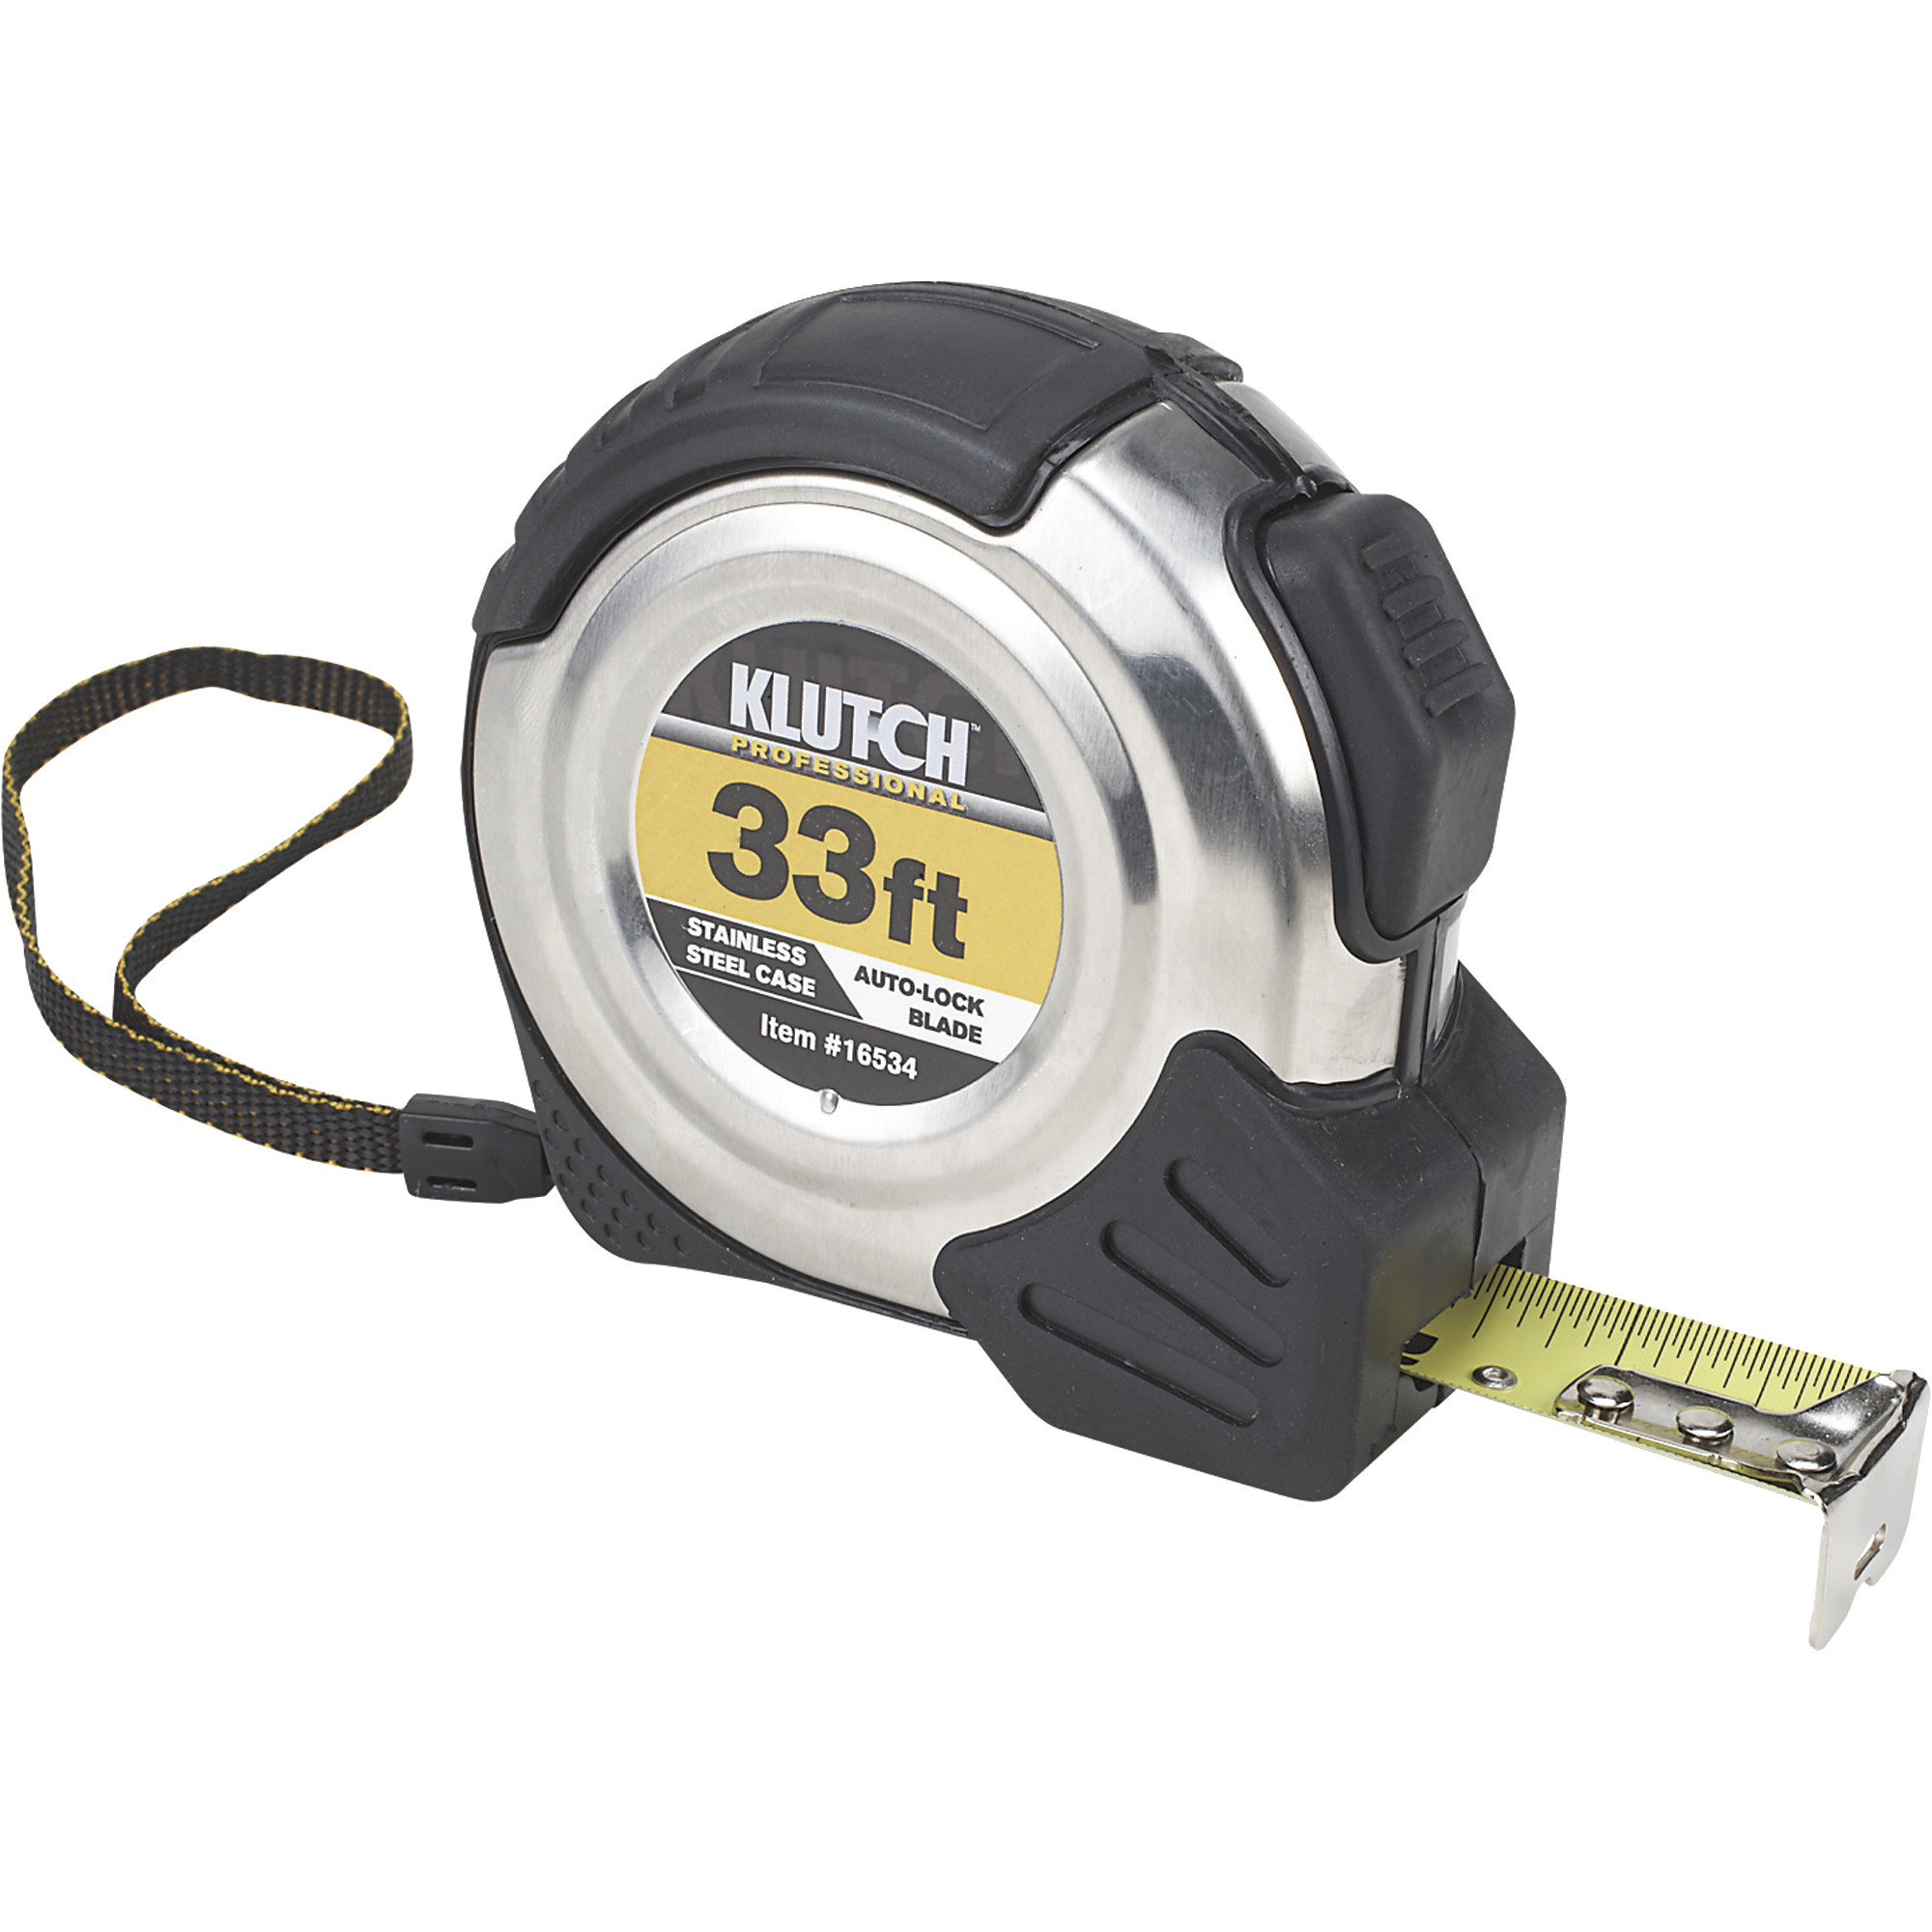 Klutch Stainless Steel Tape Measure, 1Inch x 33ft.